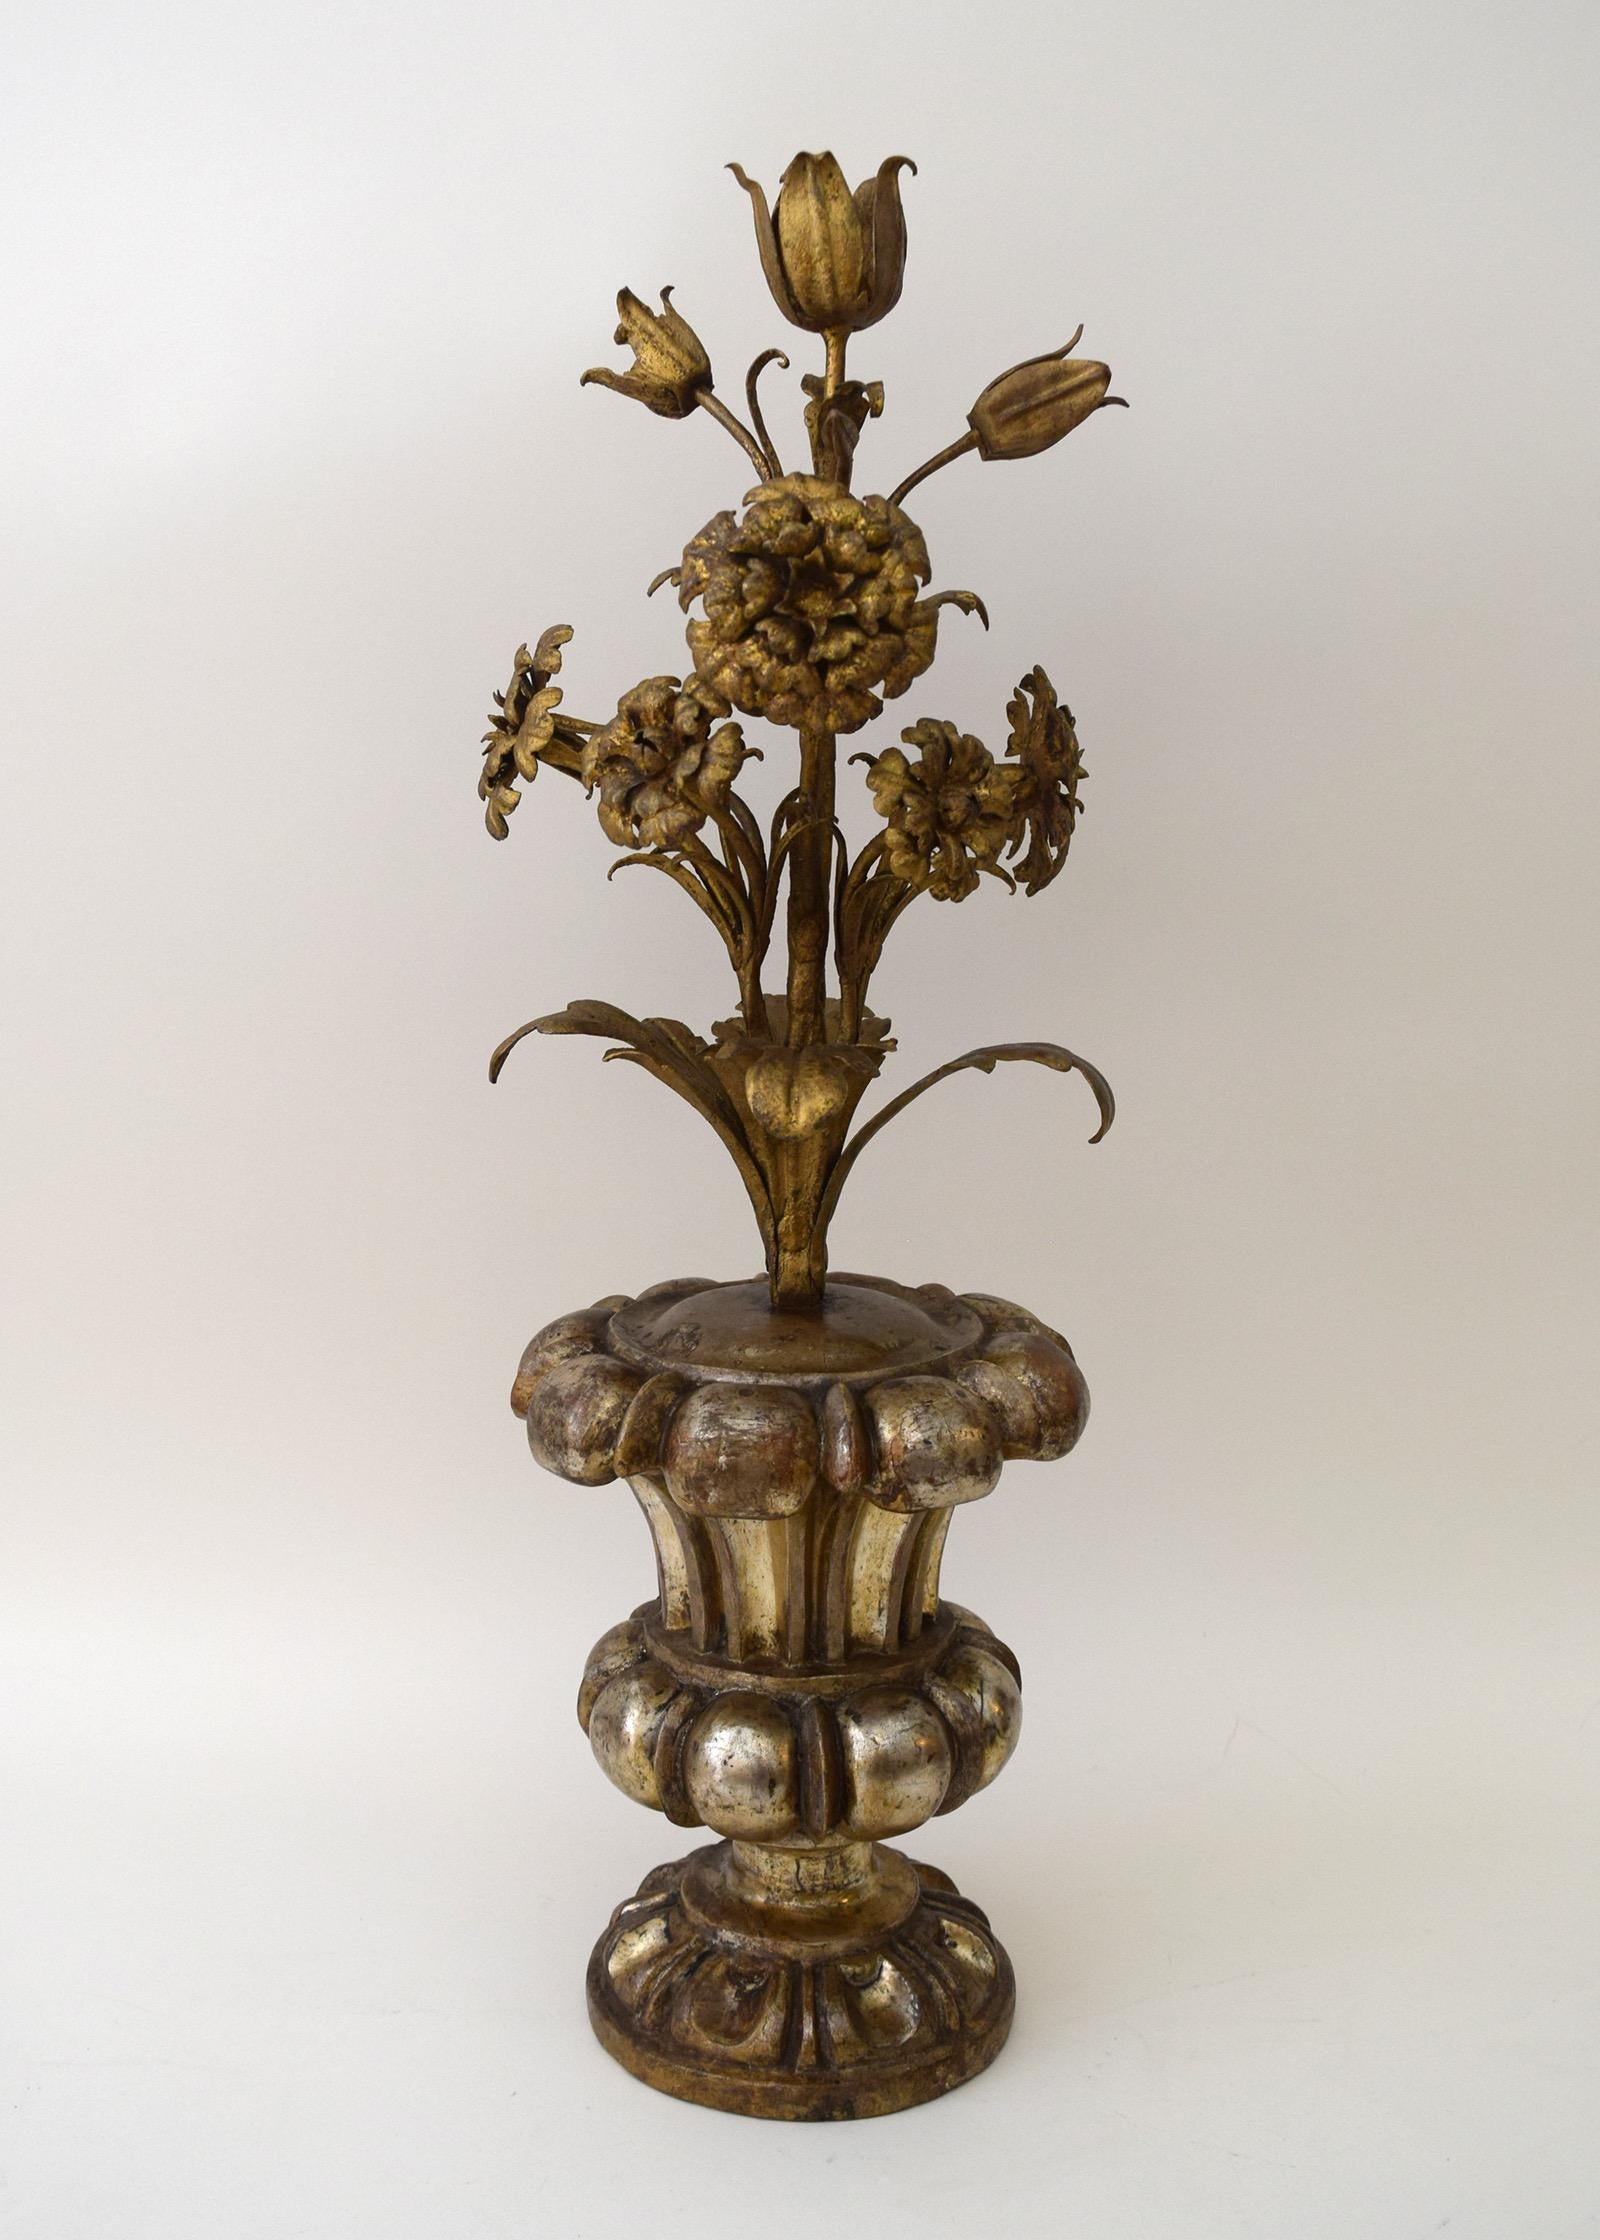 This flowering urn of gilt-metal flowers in a gessoed, silver-leafed urn was probably made in Genoa, Italy, circa 1715. If the flowers are carnations, symbol of the Virgin’s love for her Son, and lilies, symbol of the Immaculate Conception, it may